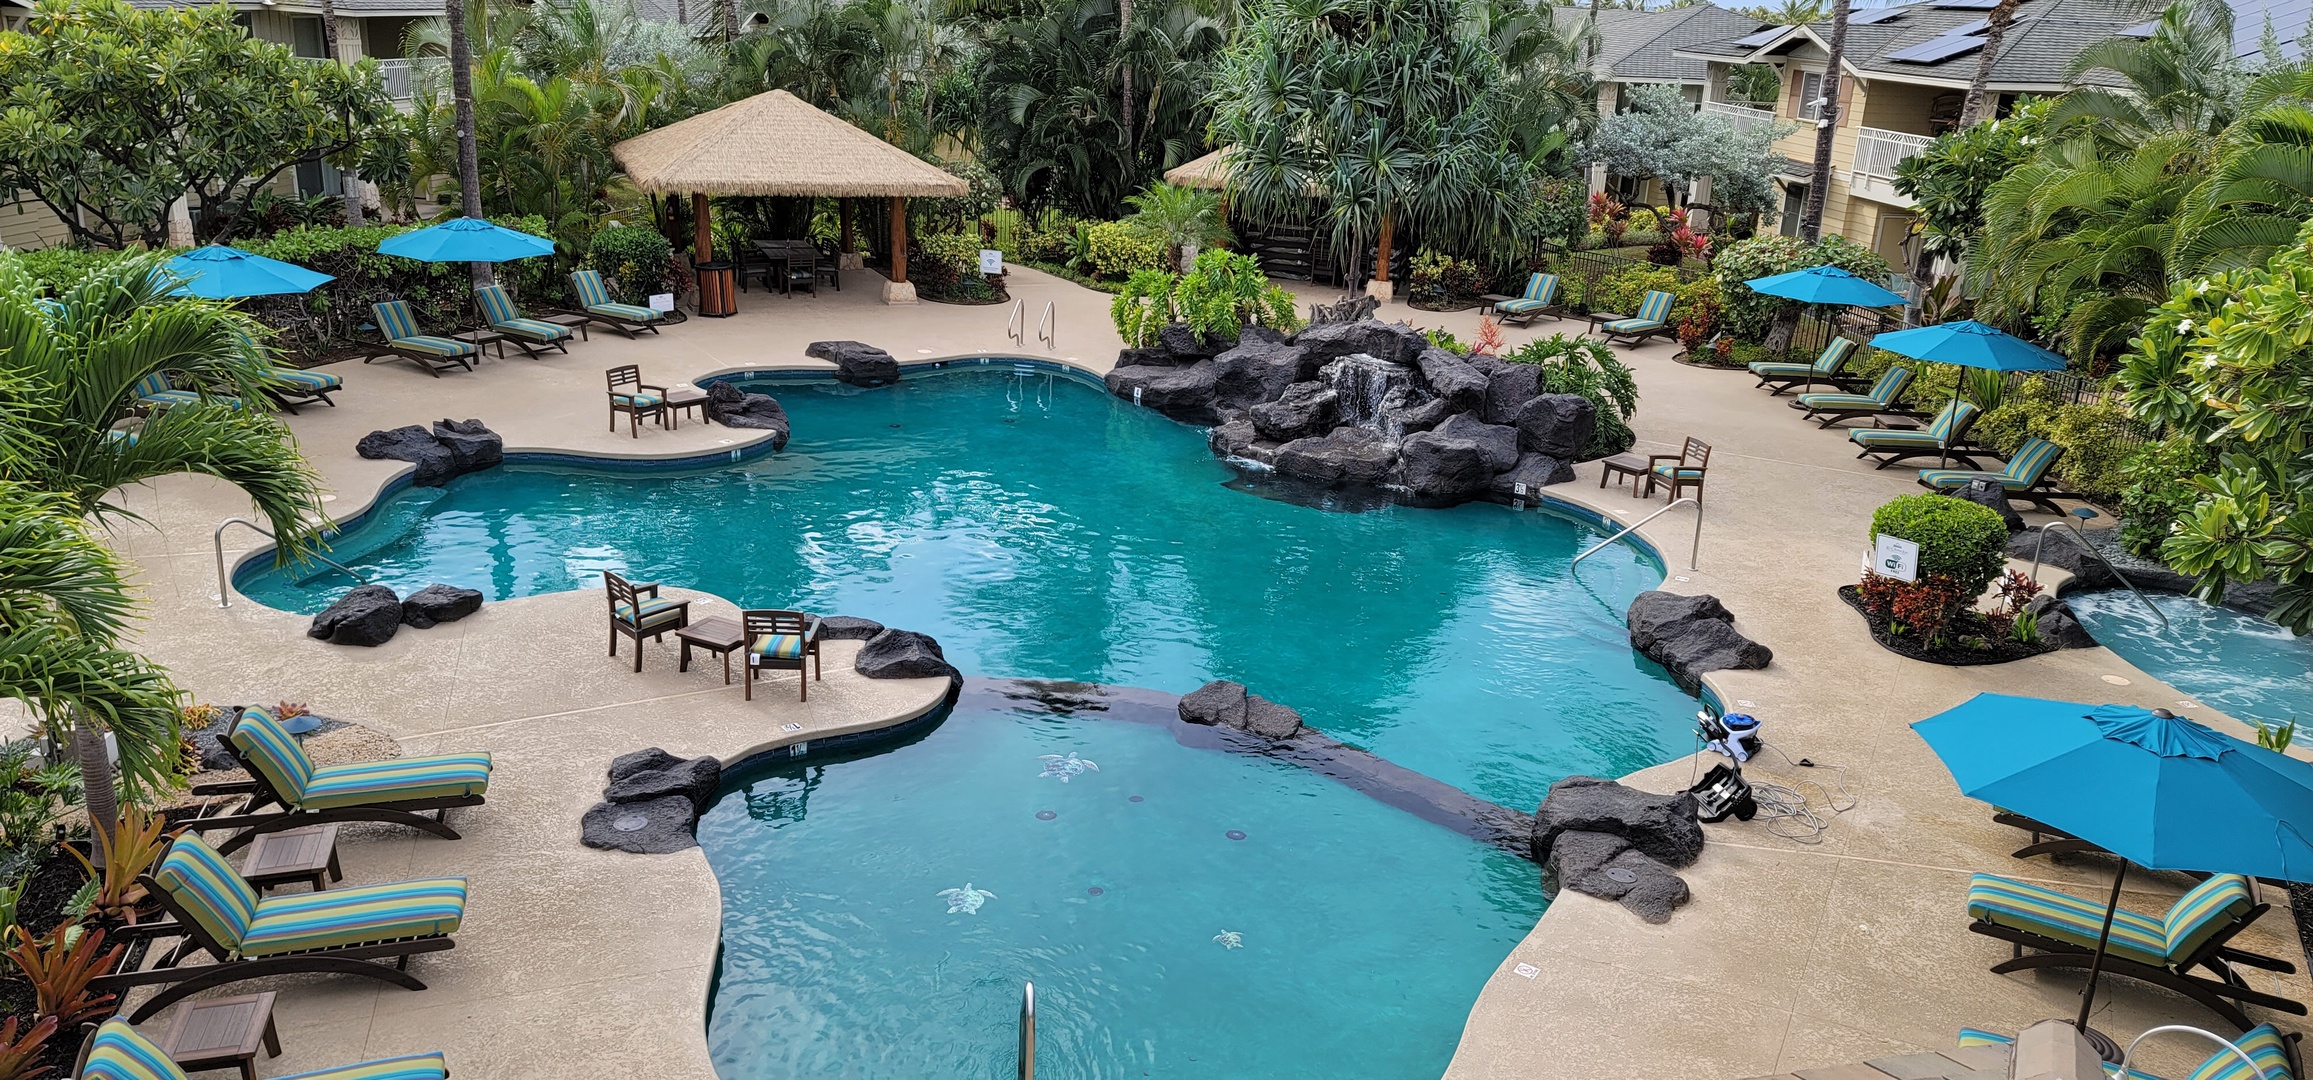 Kapolei Vacation Rentals, Ko Olina Kai 1027A - Go for a swim or lounge by the pool.